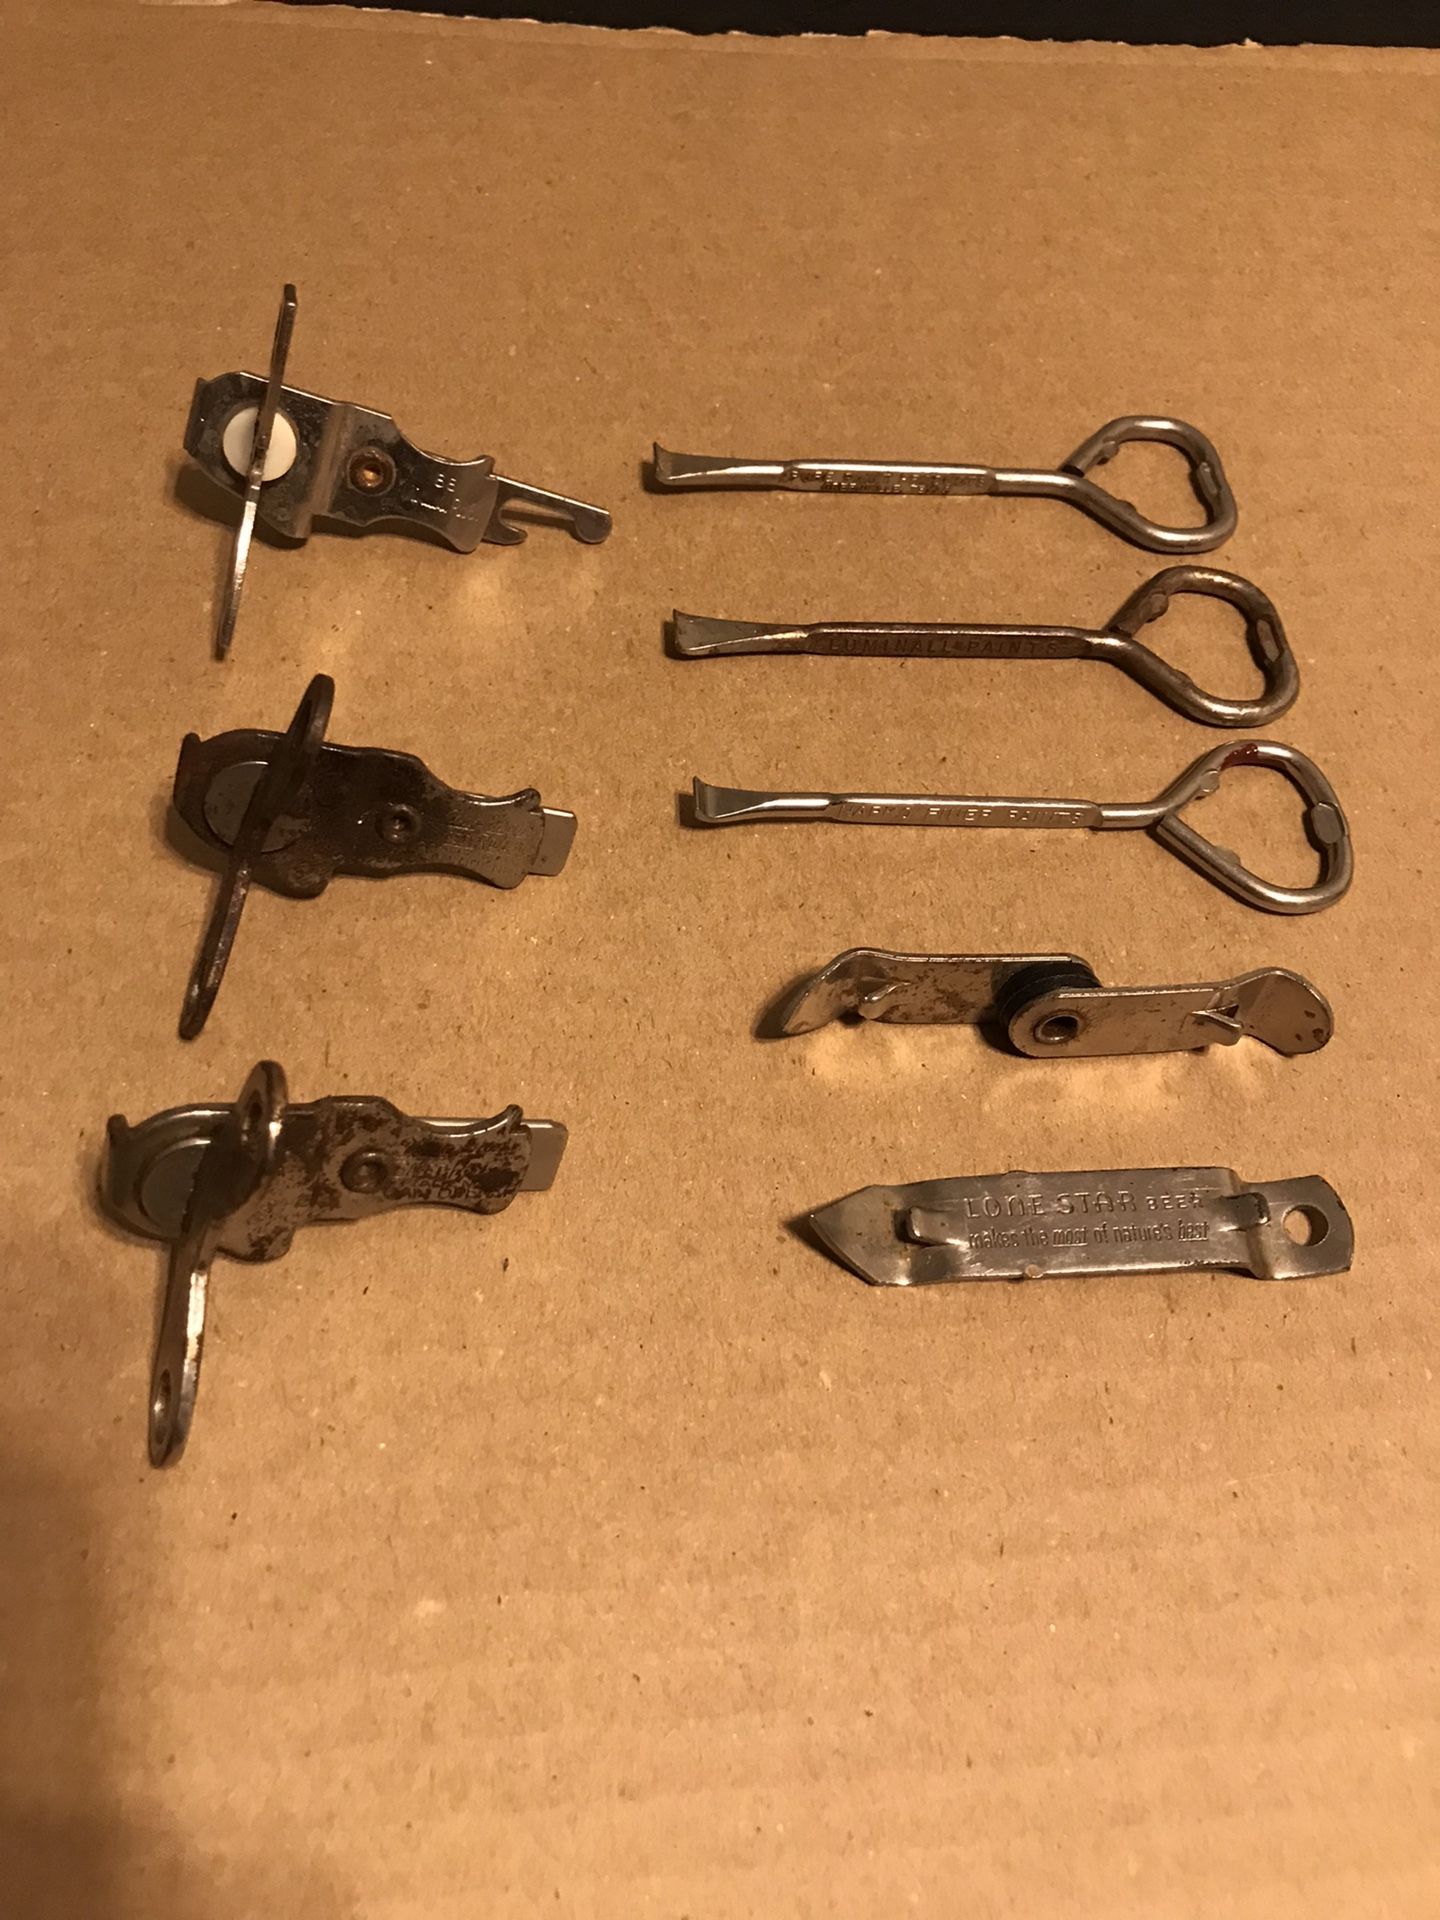 Vintage Can Opener/Bottle Opener Combo 8 Piece Set in Excellent Used Condition